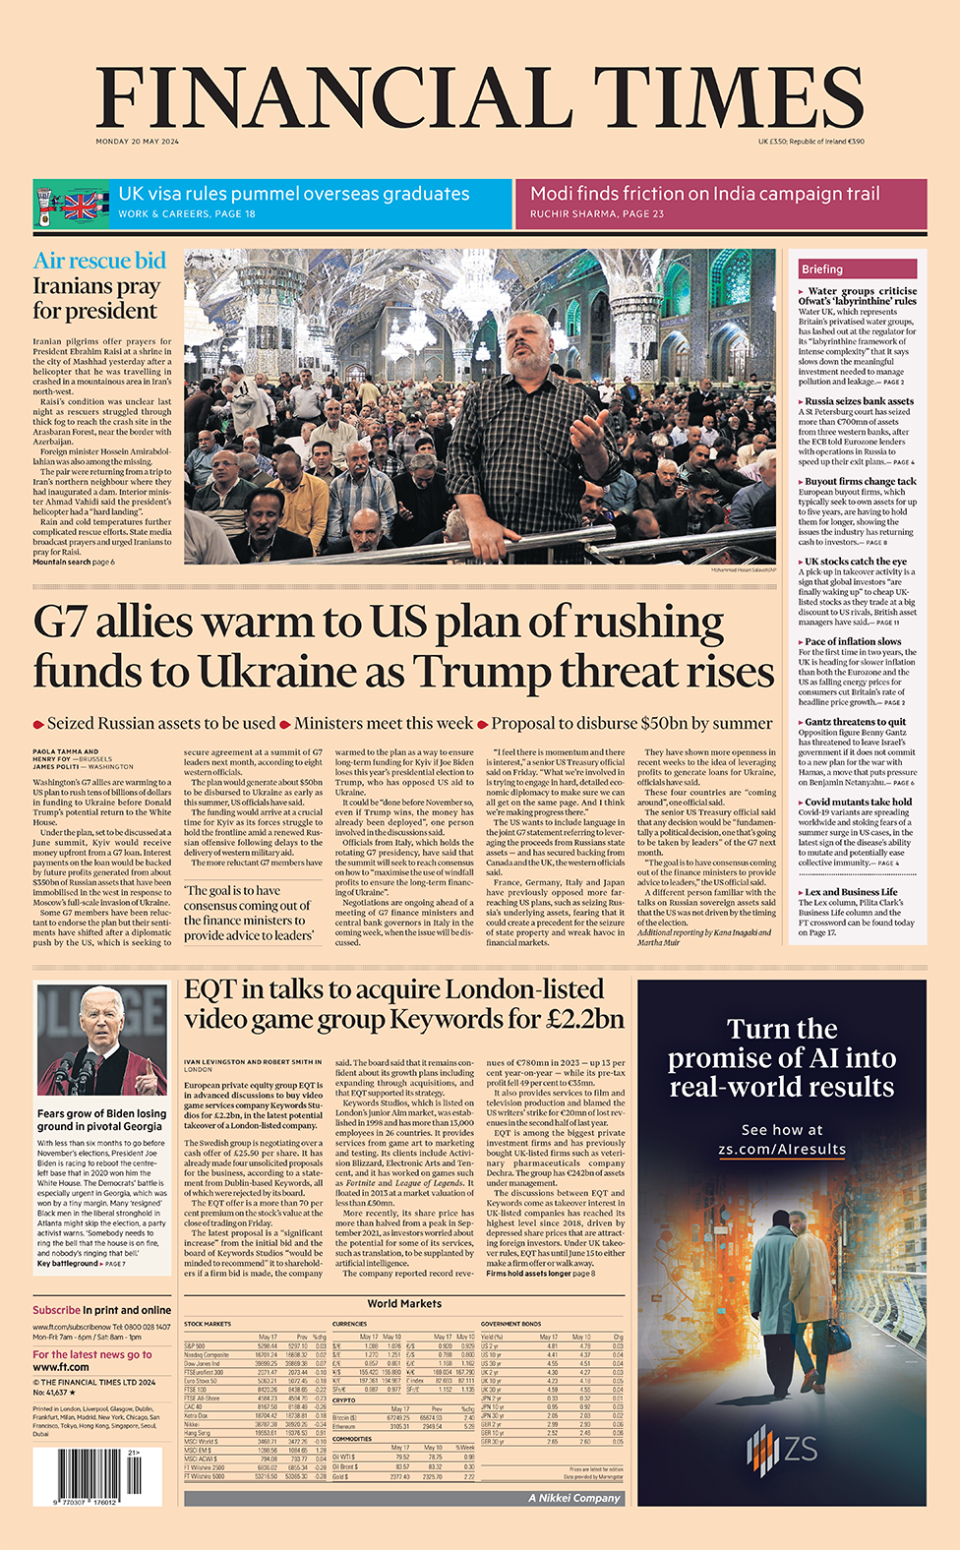 The headline on the front page of the Financial Times says: "G7 allies warm to US plan of rushing funds to Ukraine as Trump threat rises"